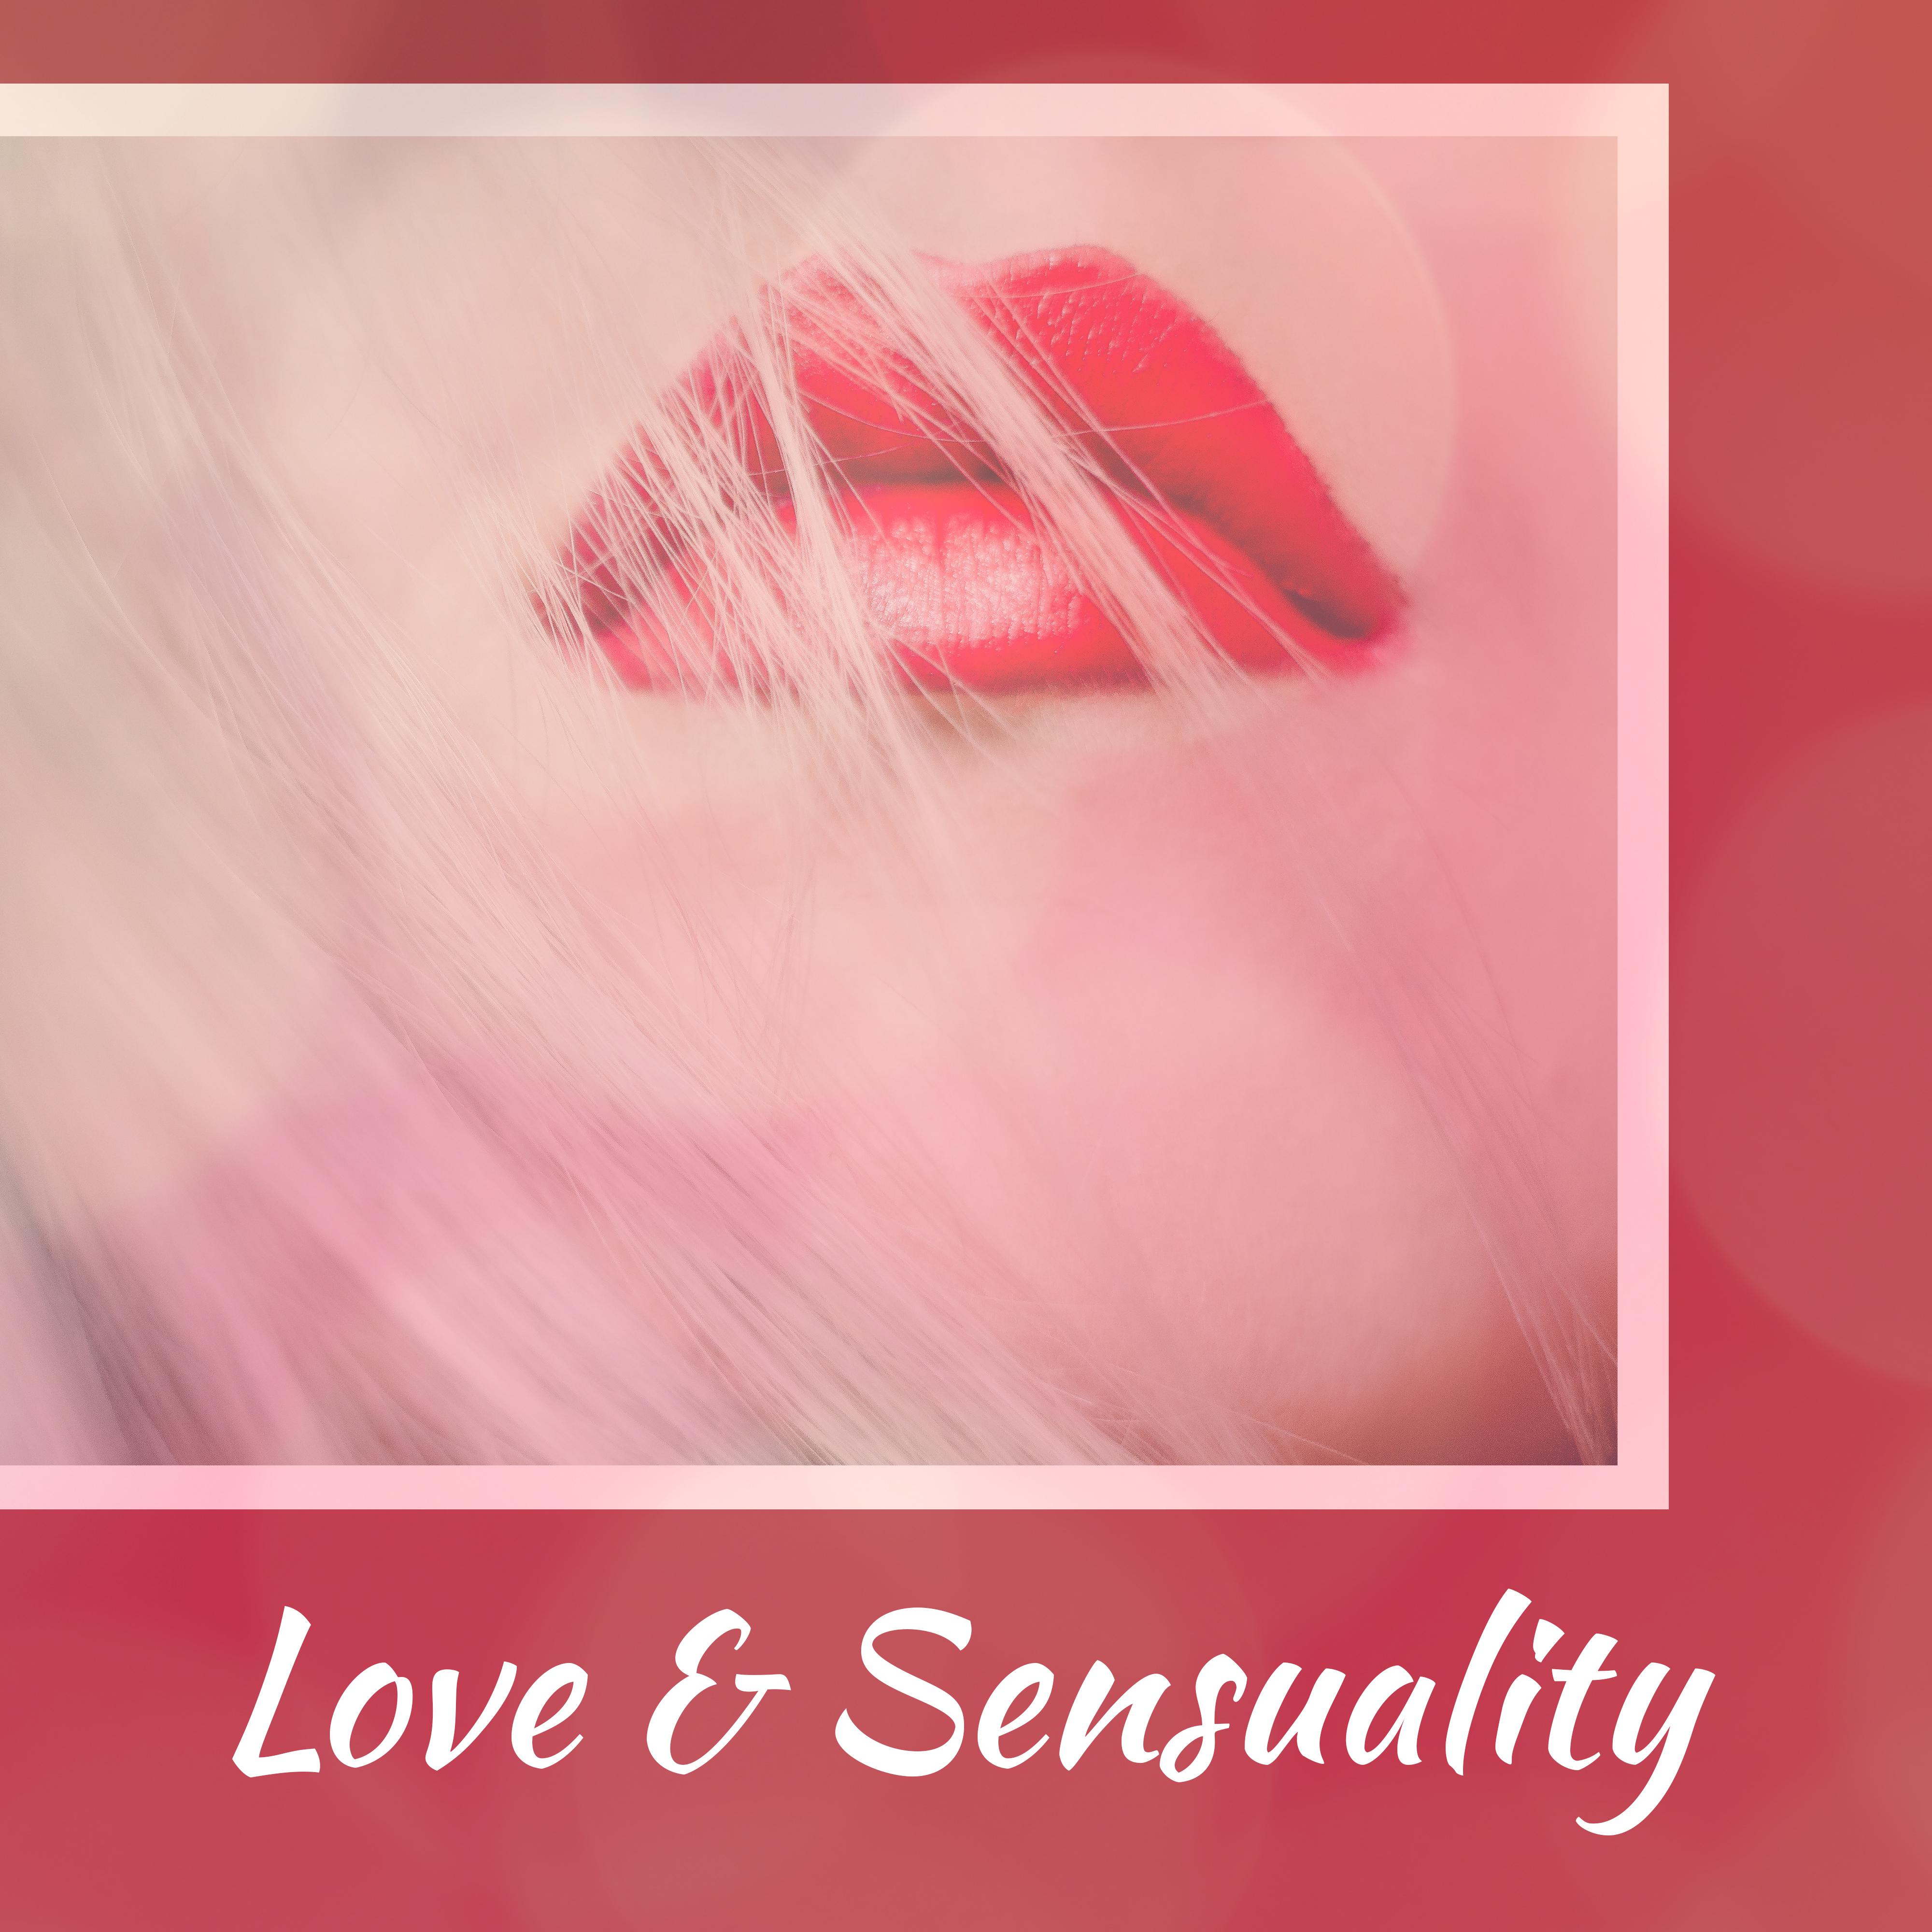 Love  Sensuality  Romantic Jazz for Lovers, Strong Feeling, True Love, Best Smooth Jazz at Night, Romantic Evening